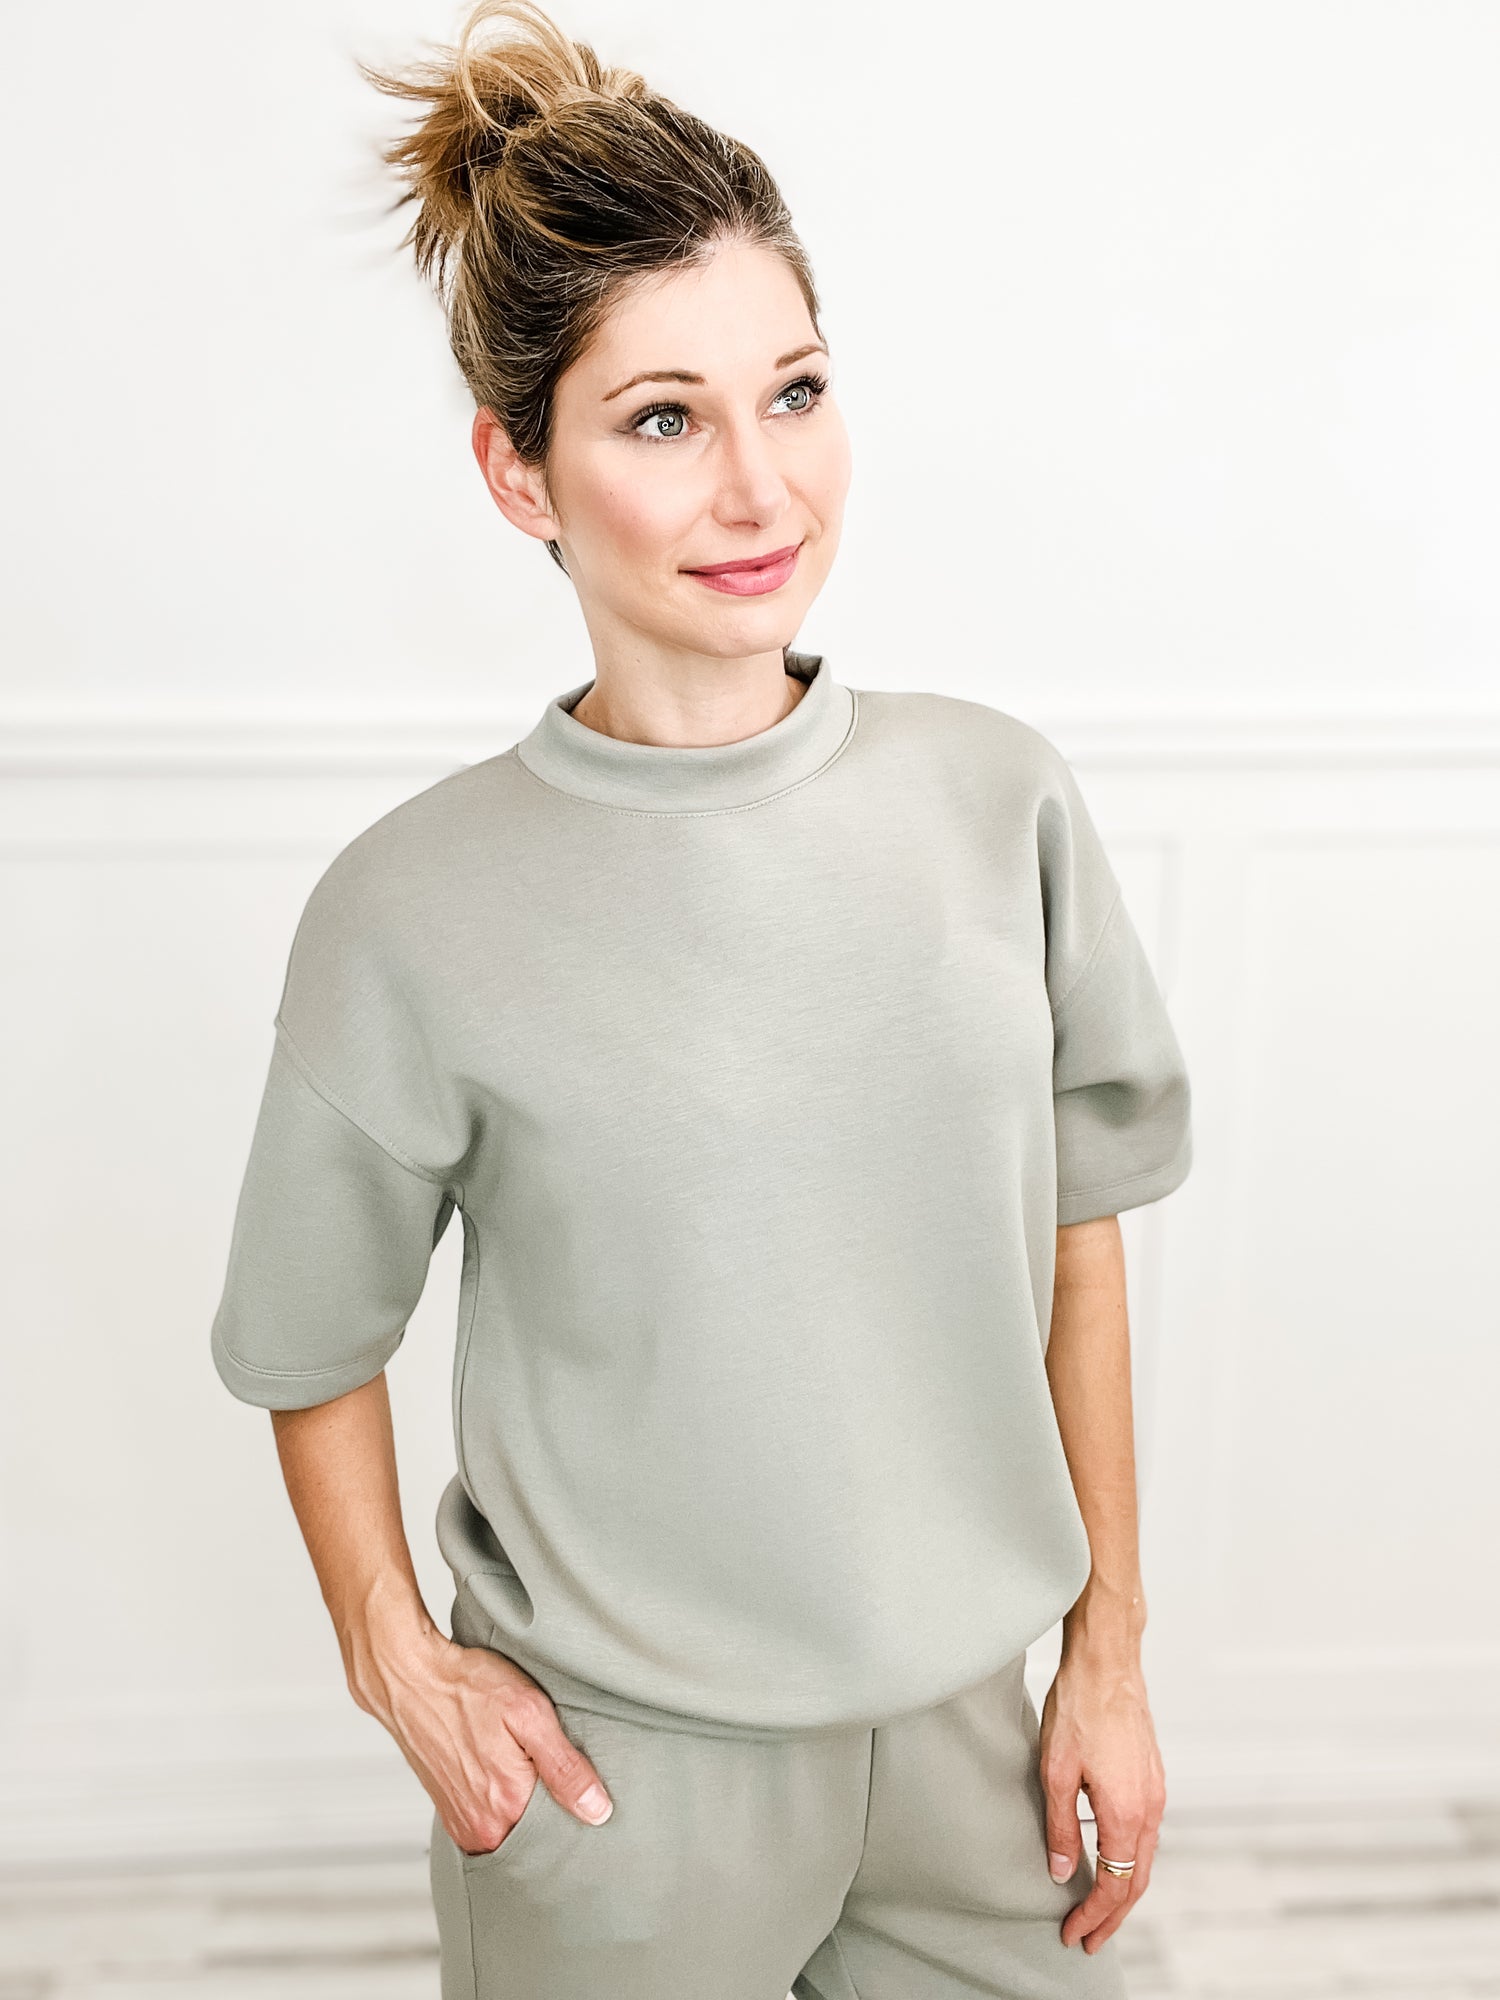 Ready Or Not Modal Poly Span Mock Neck Top - Group B